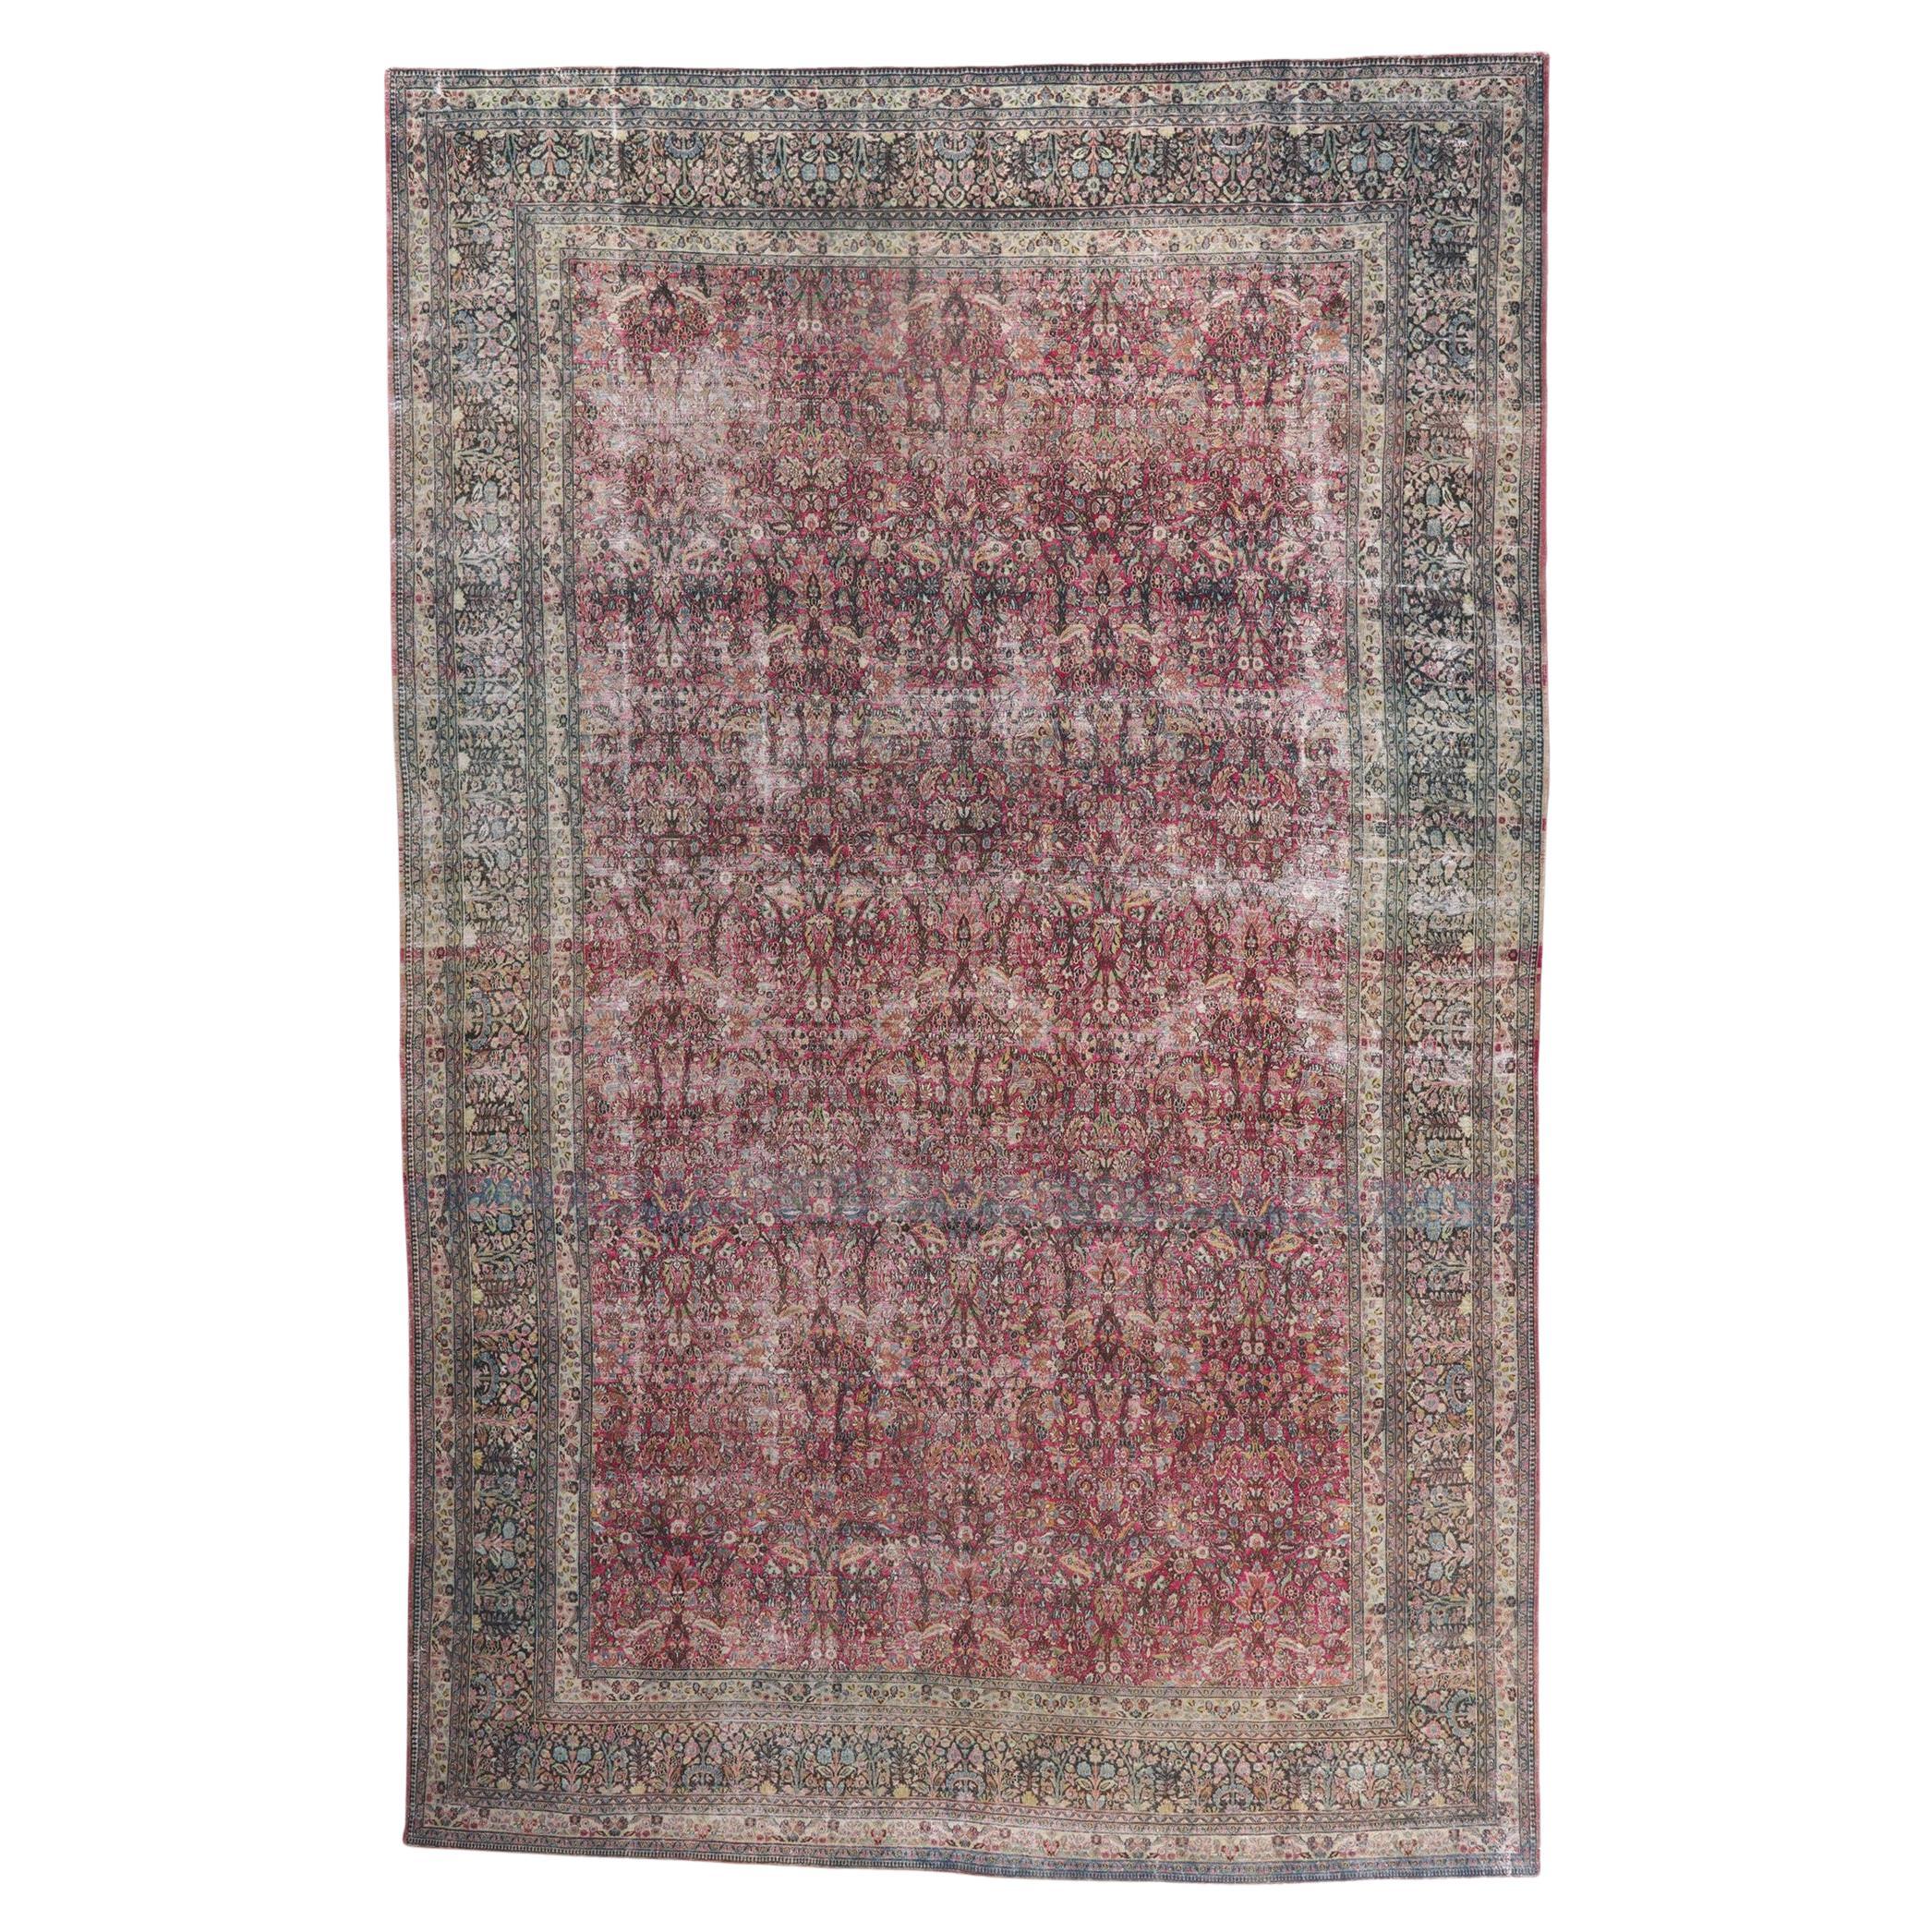 Antique-Worn Persian Khorassan Rug, Victorian Elegance Meets Weathered Finesse For Sale